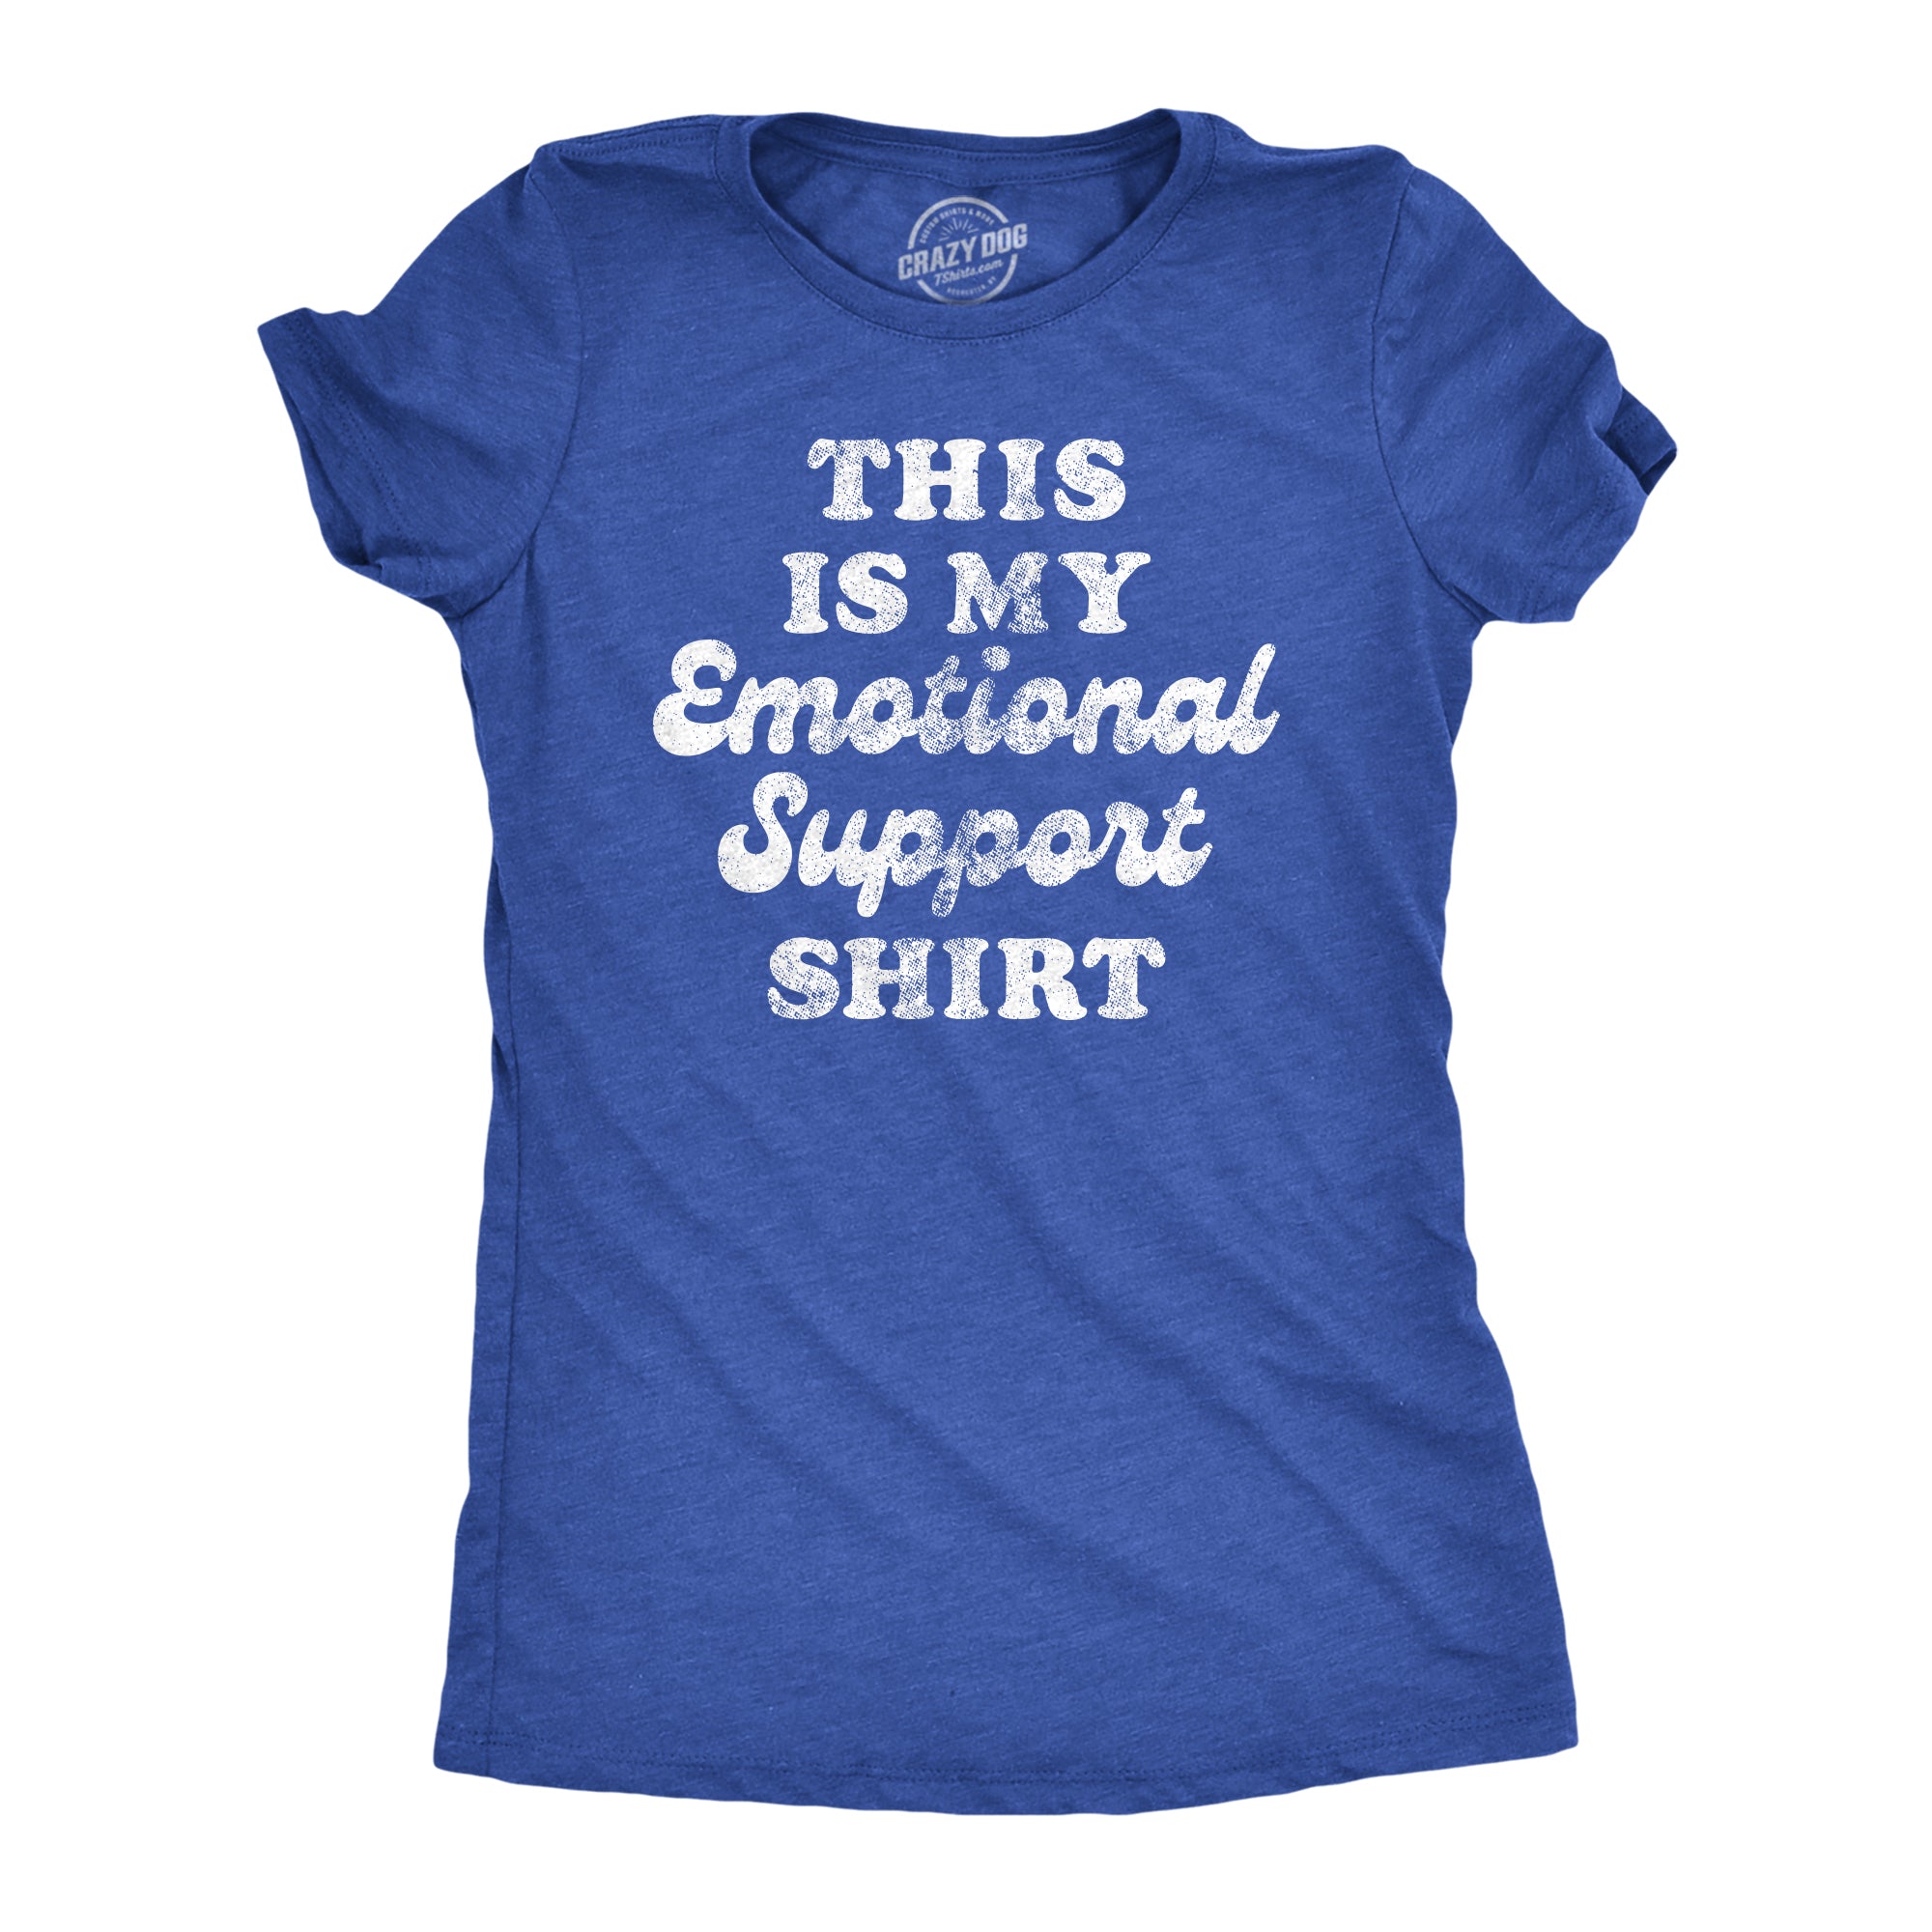 Funny Heather Royal - SHIRT This Is My Emotional Support Shirt Womens T Shirt Nerdy Sarcastic Tee